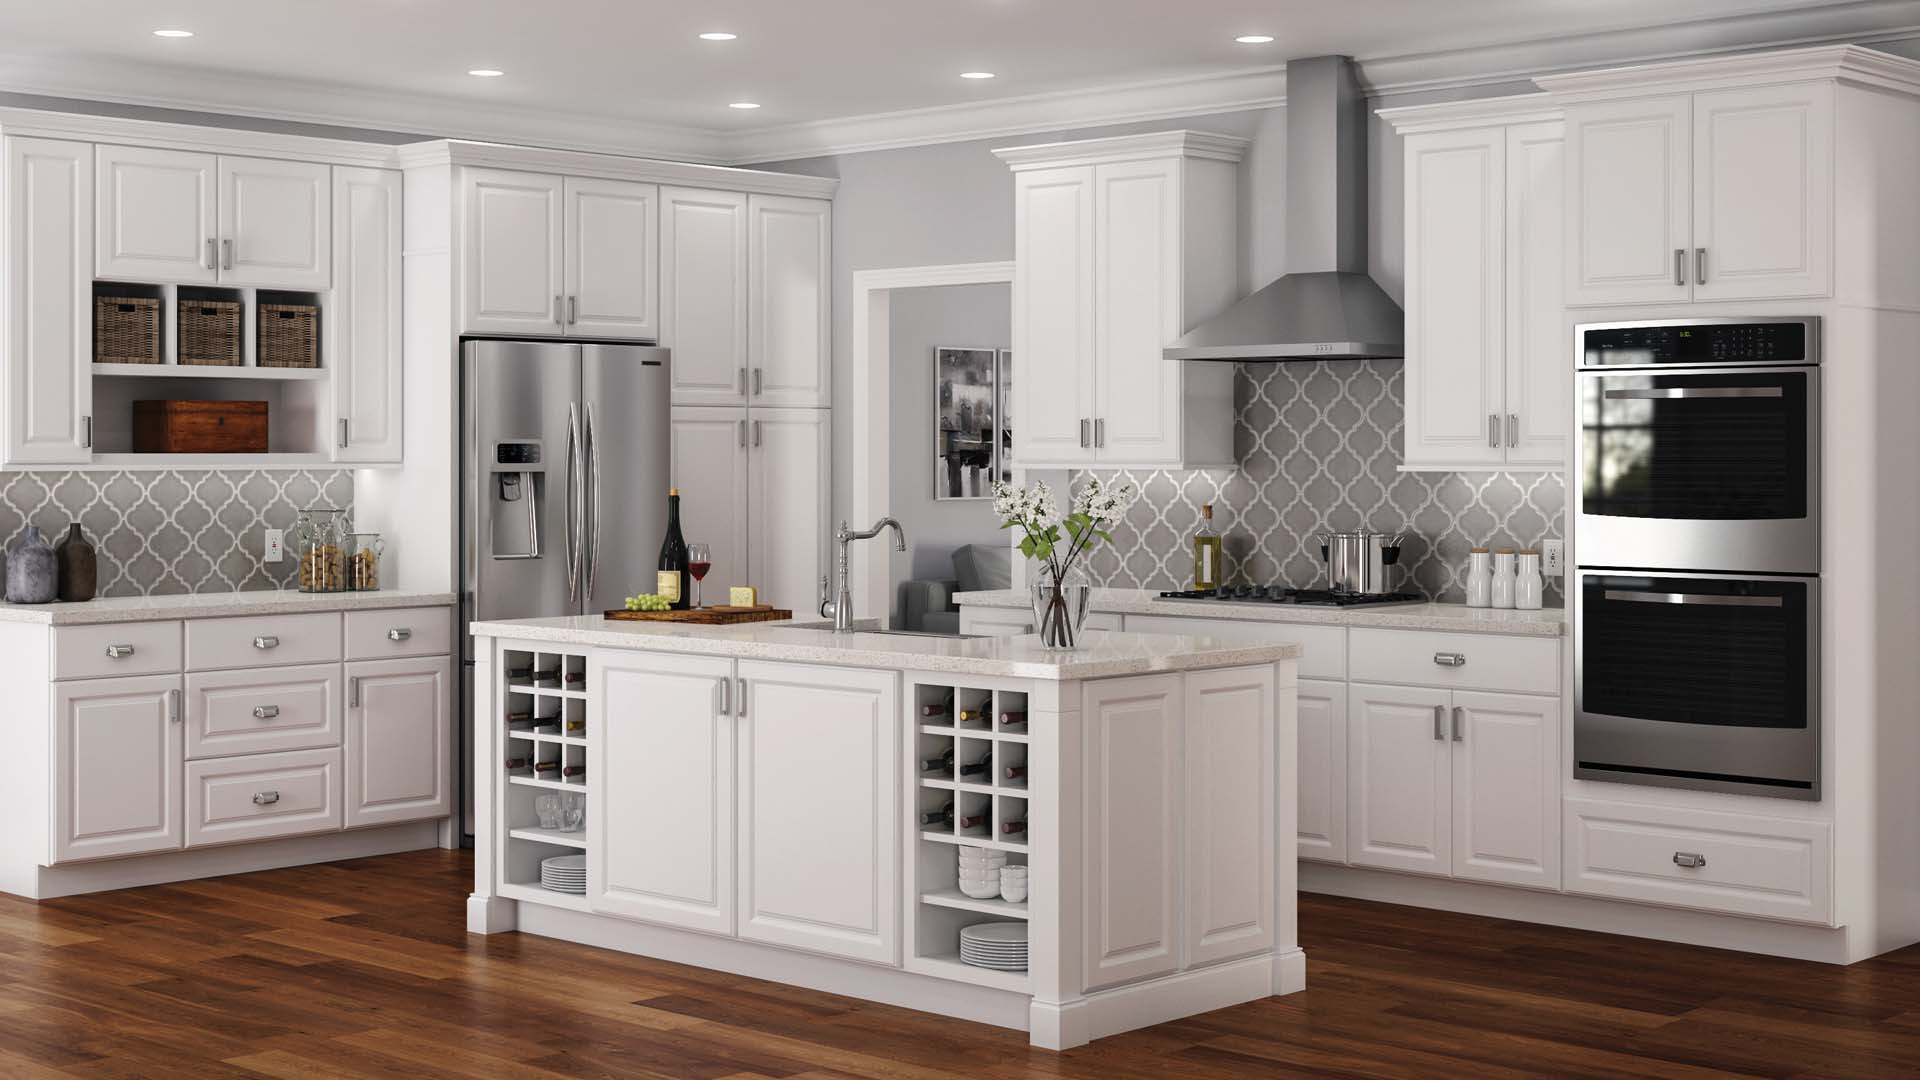 Home Depot Kitchen Cabinet Paint
 Hampton Cabinet Accessories in White – Kitchen – The Home